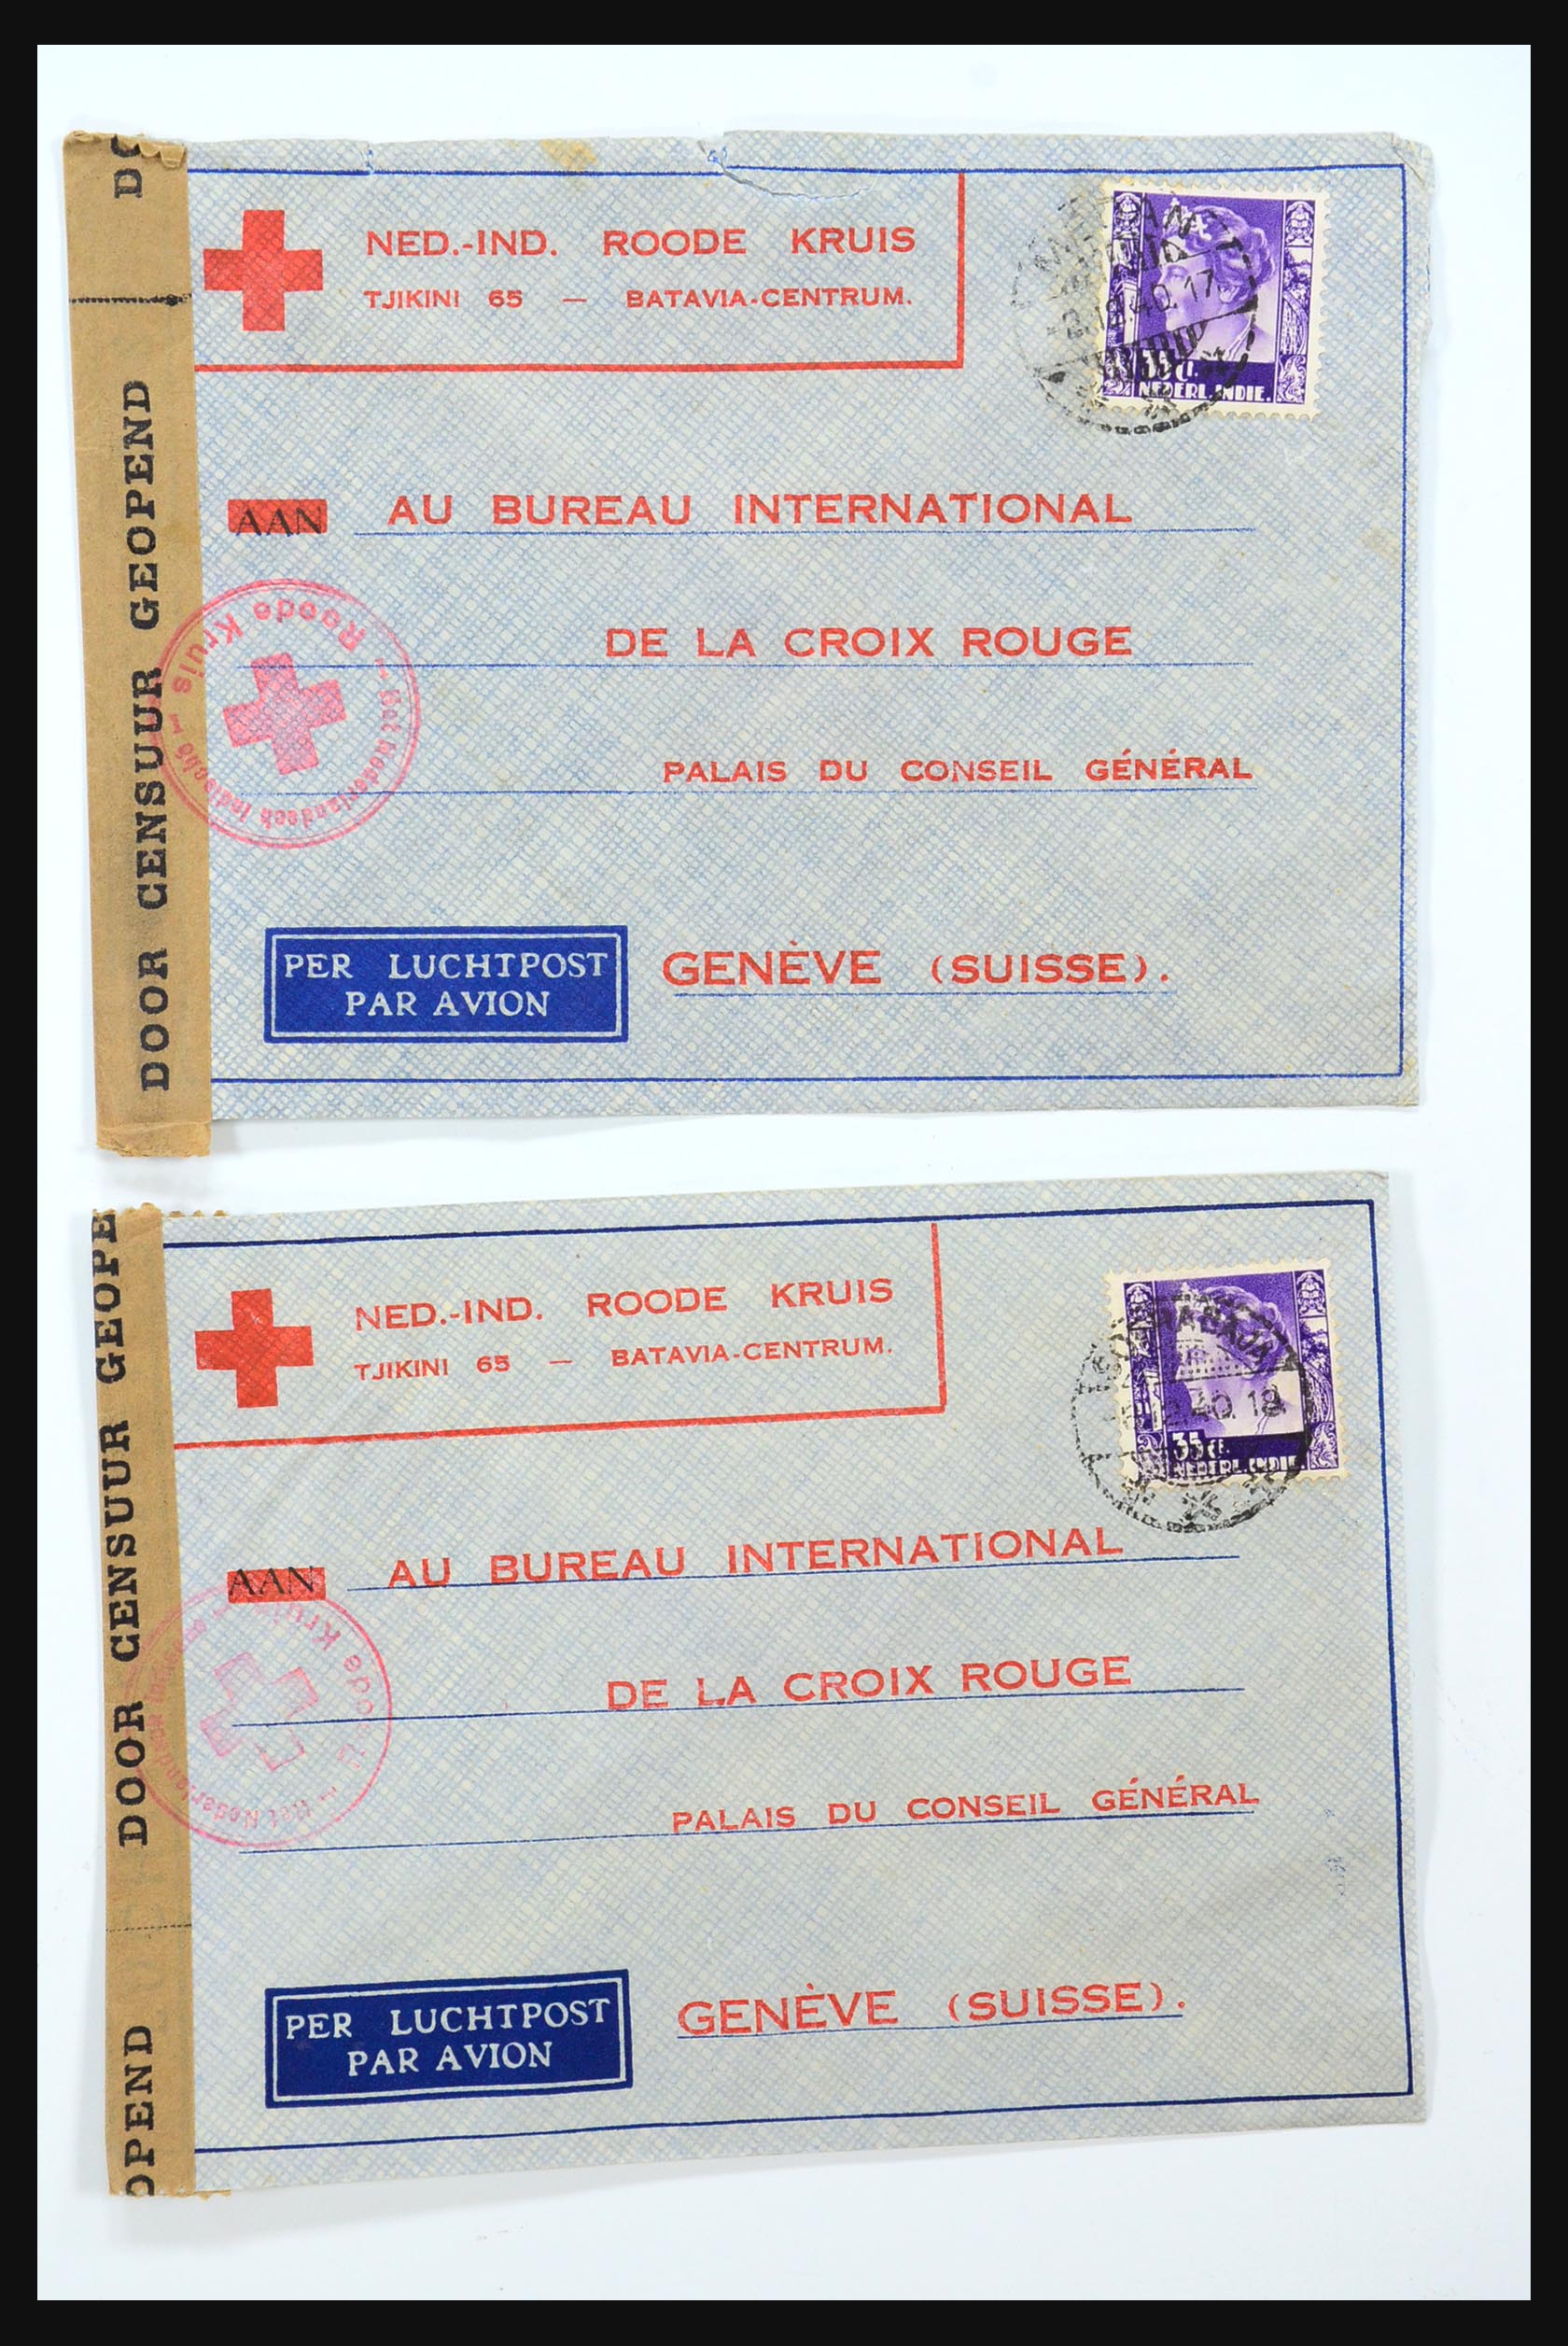 31362 114 - 31362 Netherlands Indies Japanese occupation covers 1942-1945.